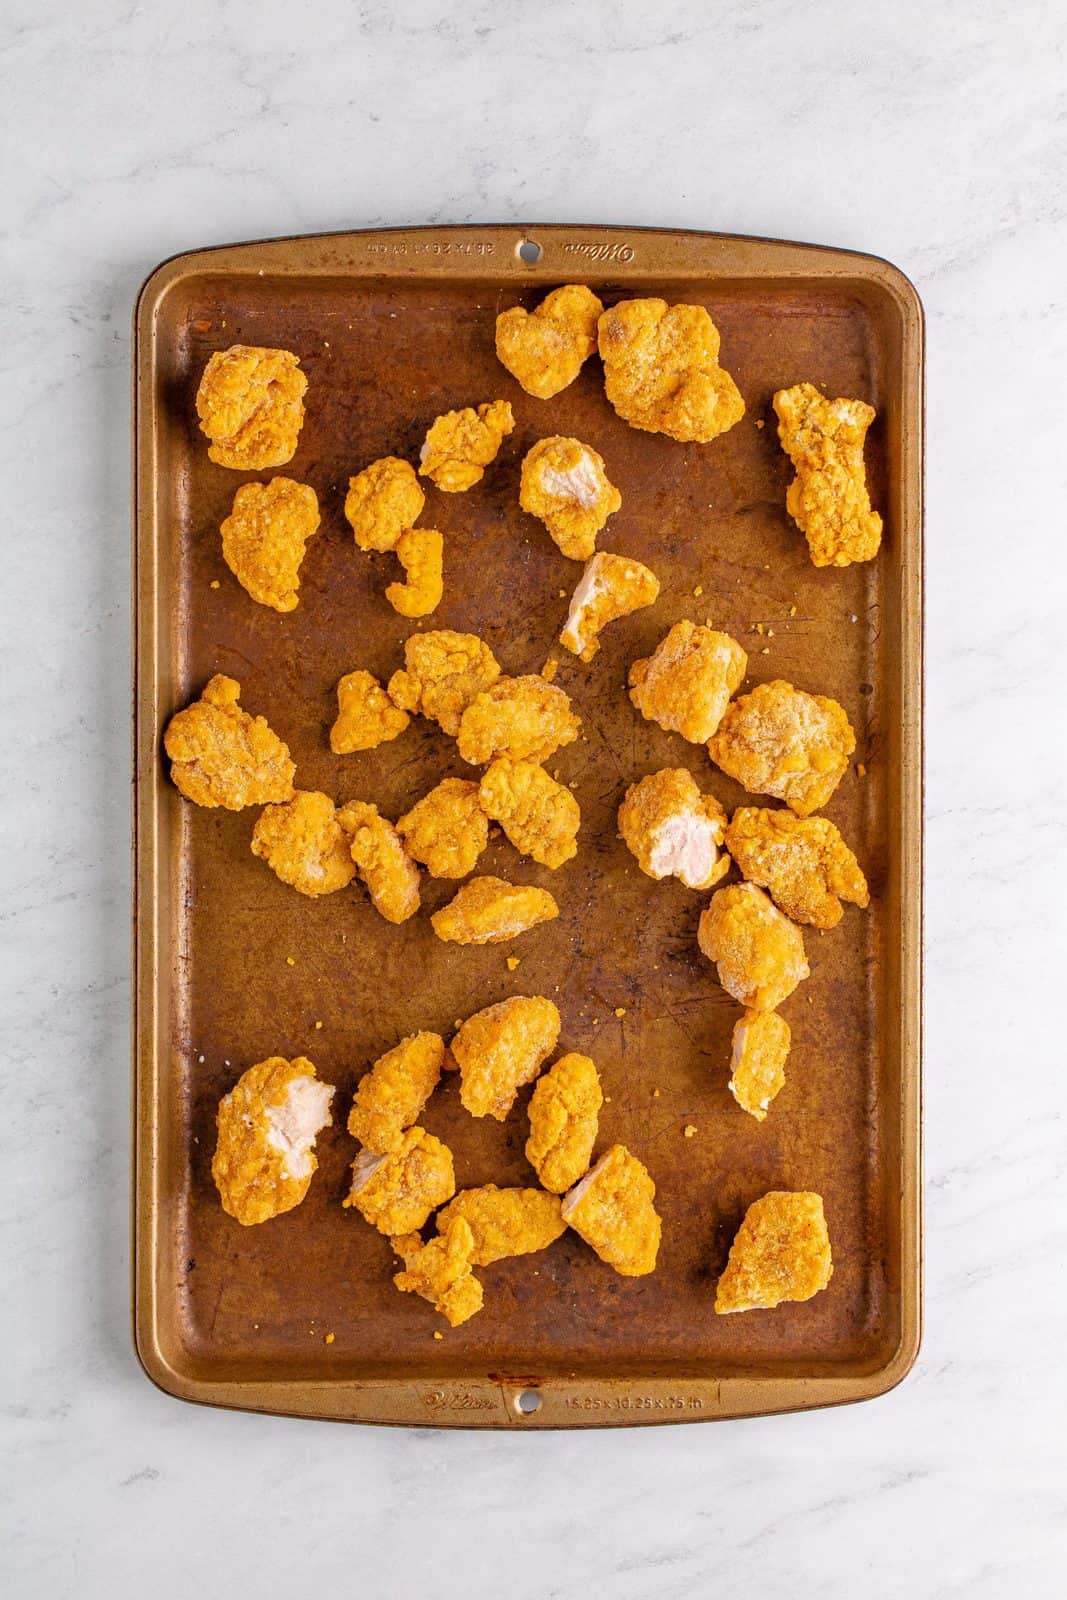 Cooked popcorn chicken on baking sheet.